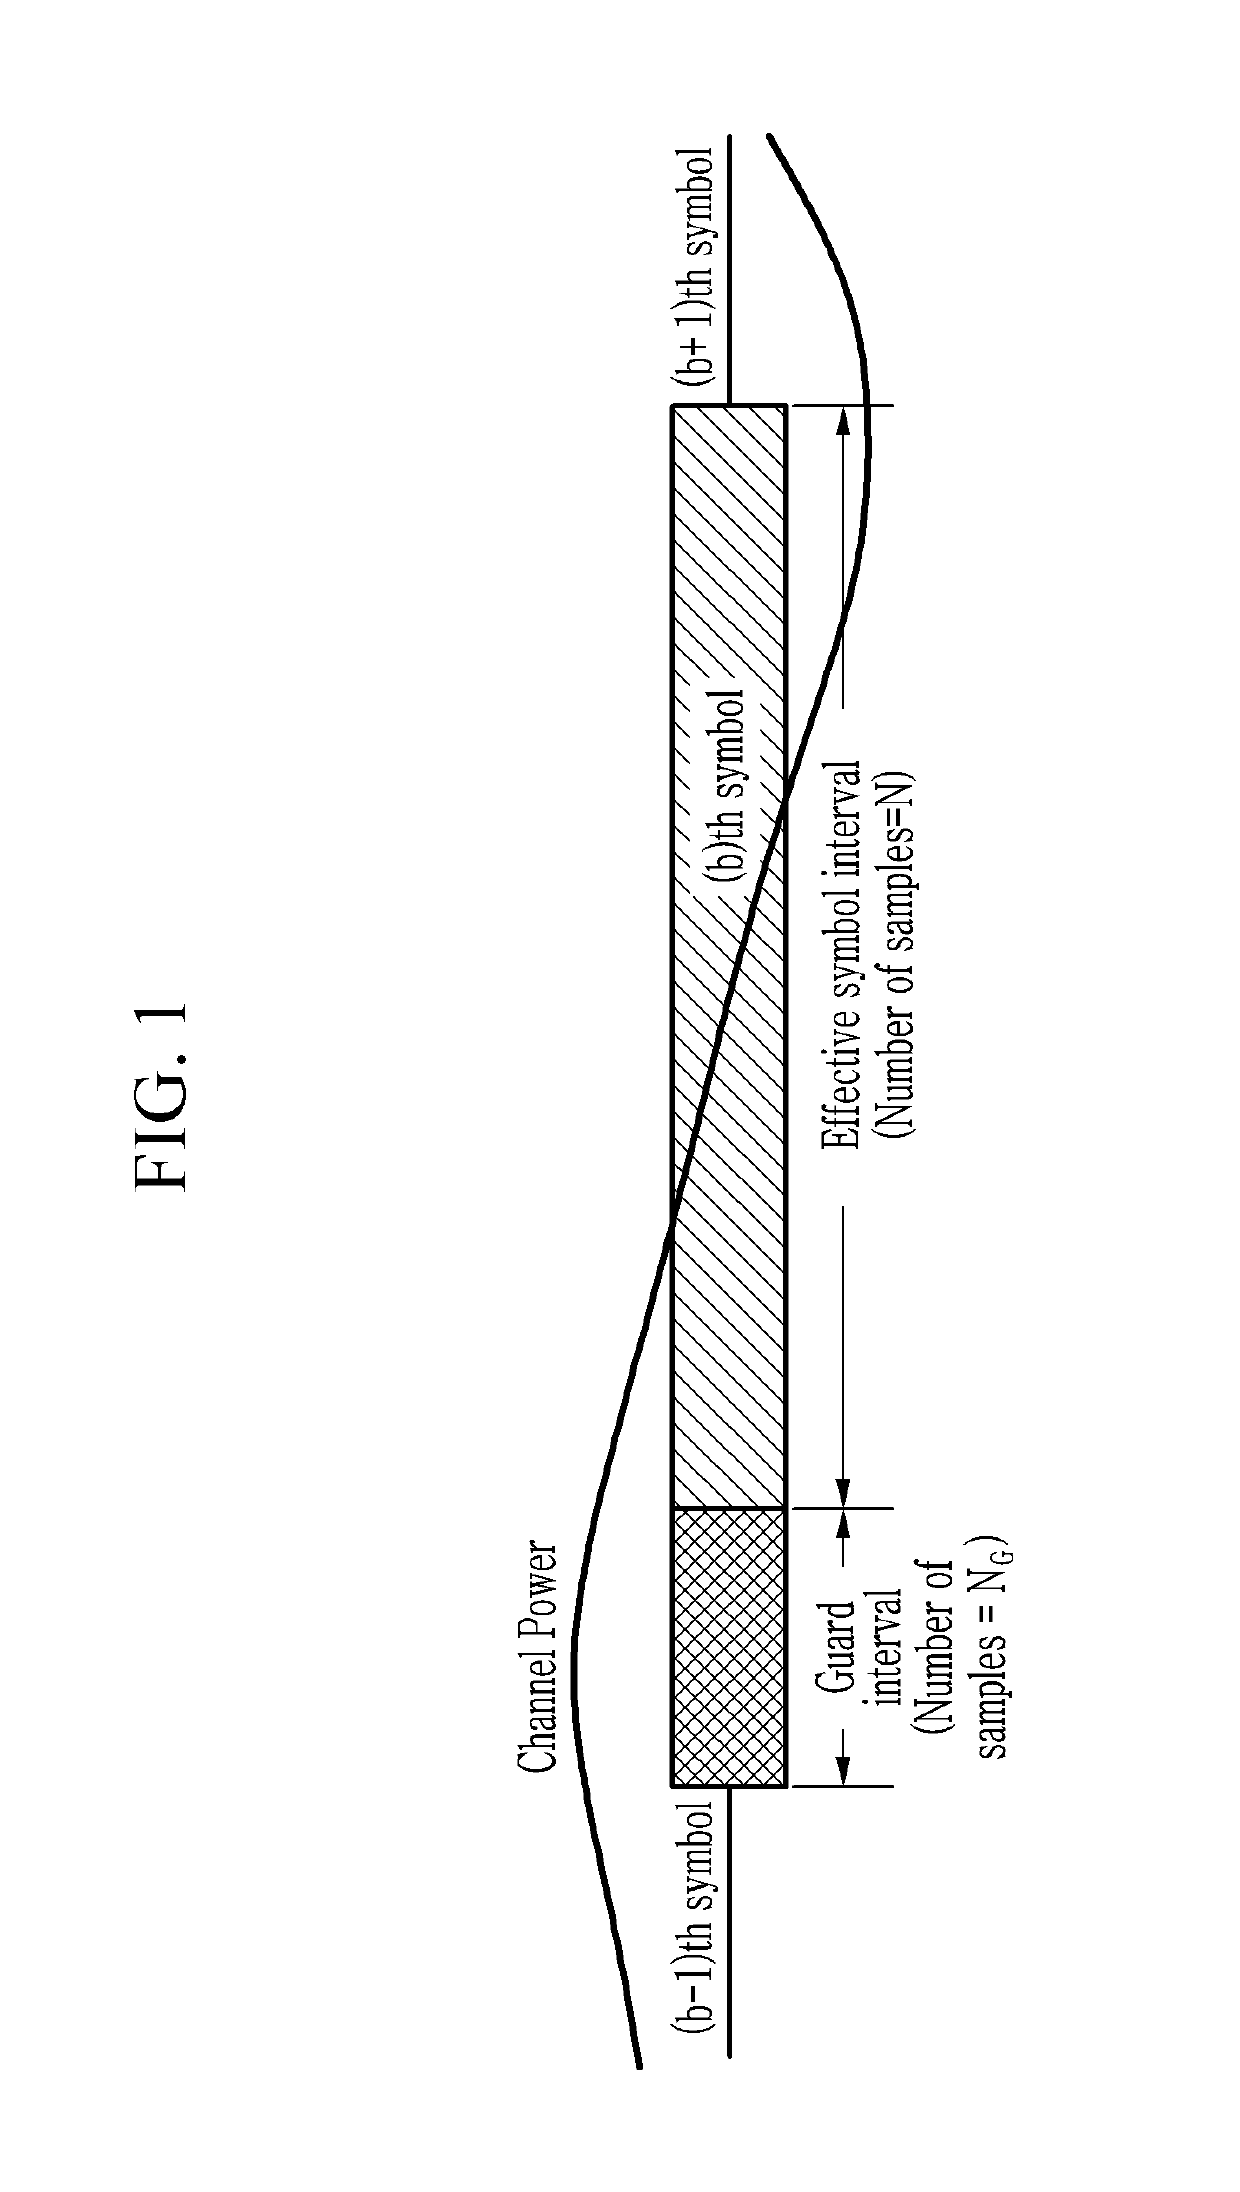 Method for suppressing inter-subcarrier interference and noise signal, and orthogonal frequency division multiplexing receiver for performing same